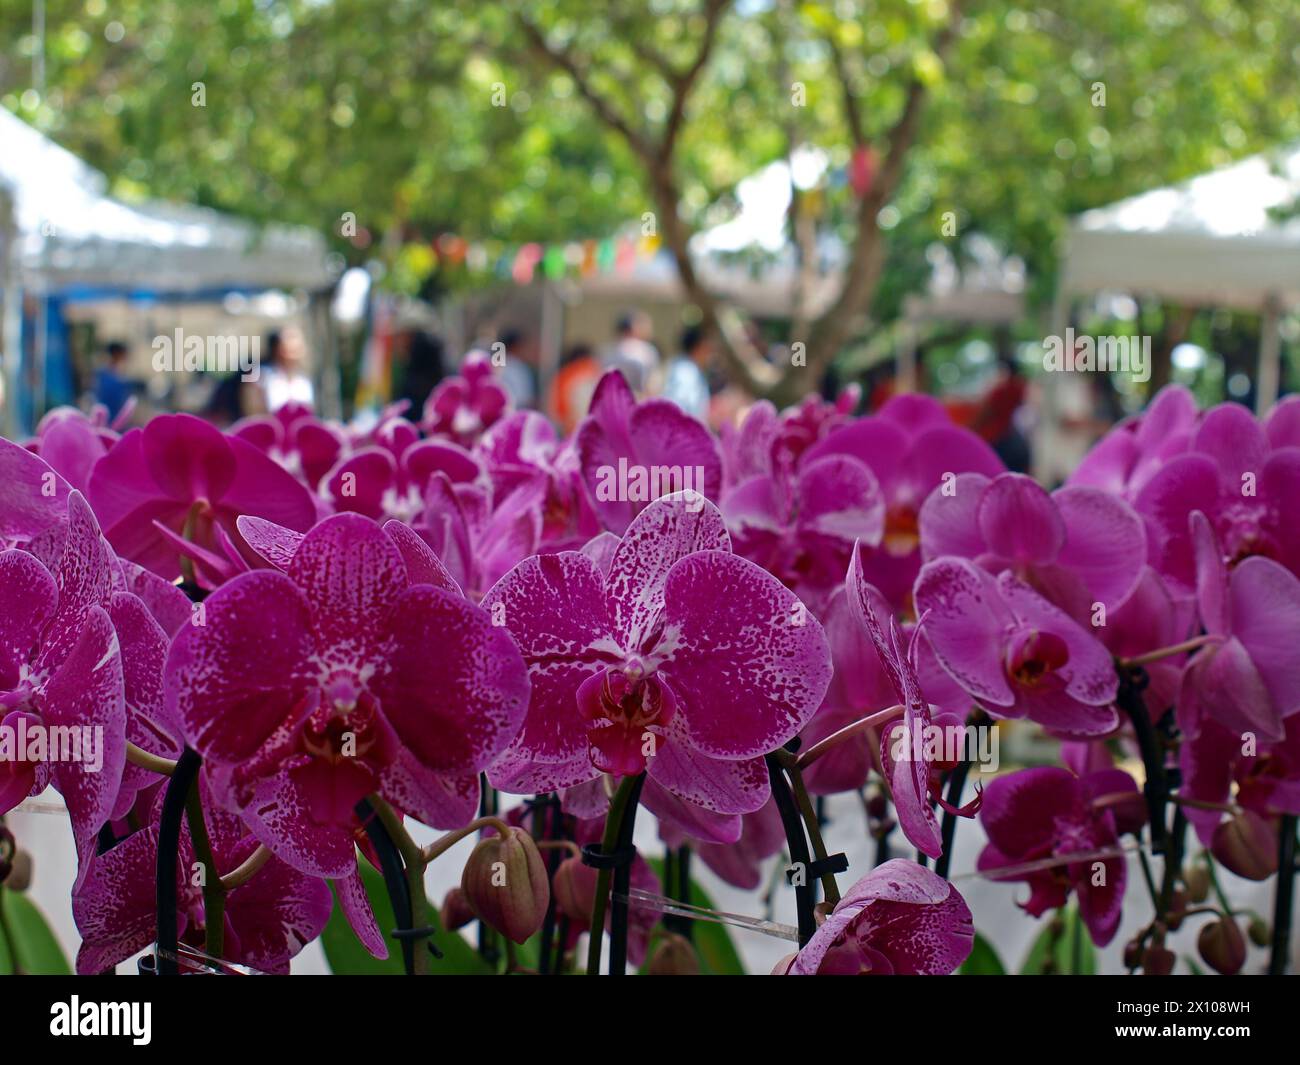 Orchards and people in a public market. Stock Photo